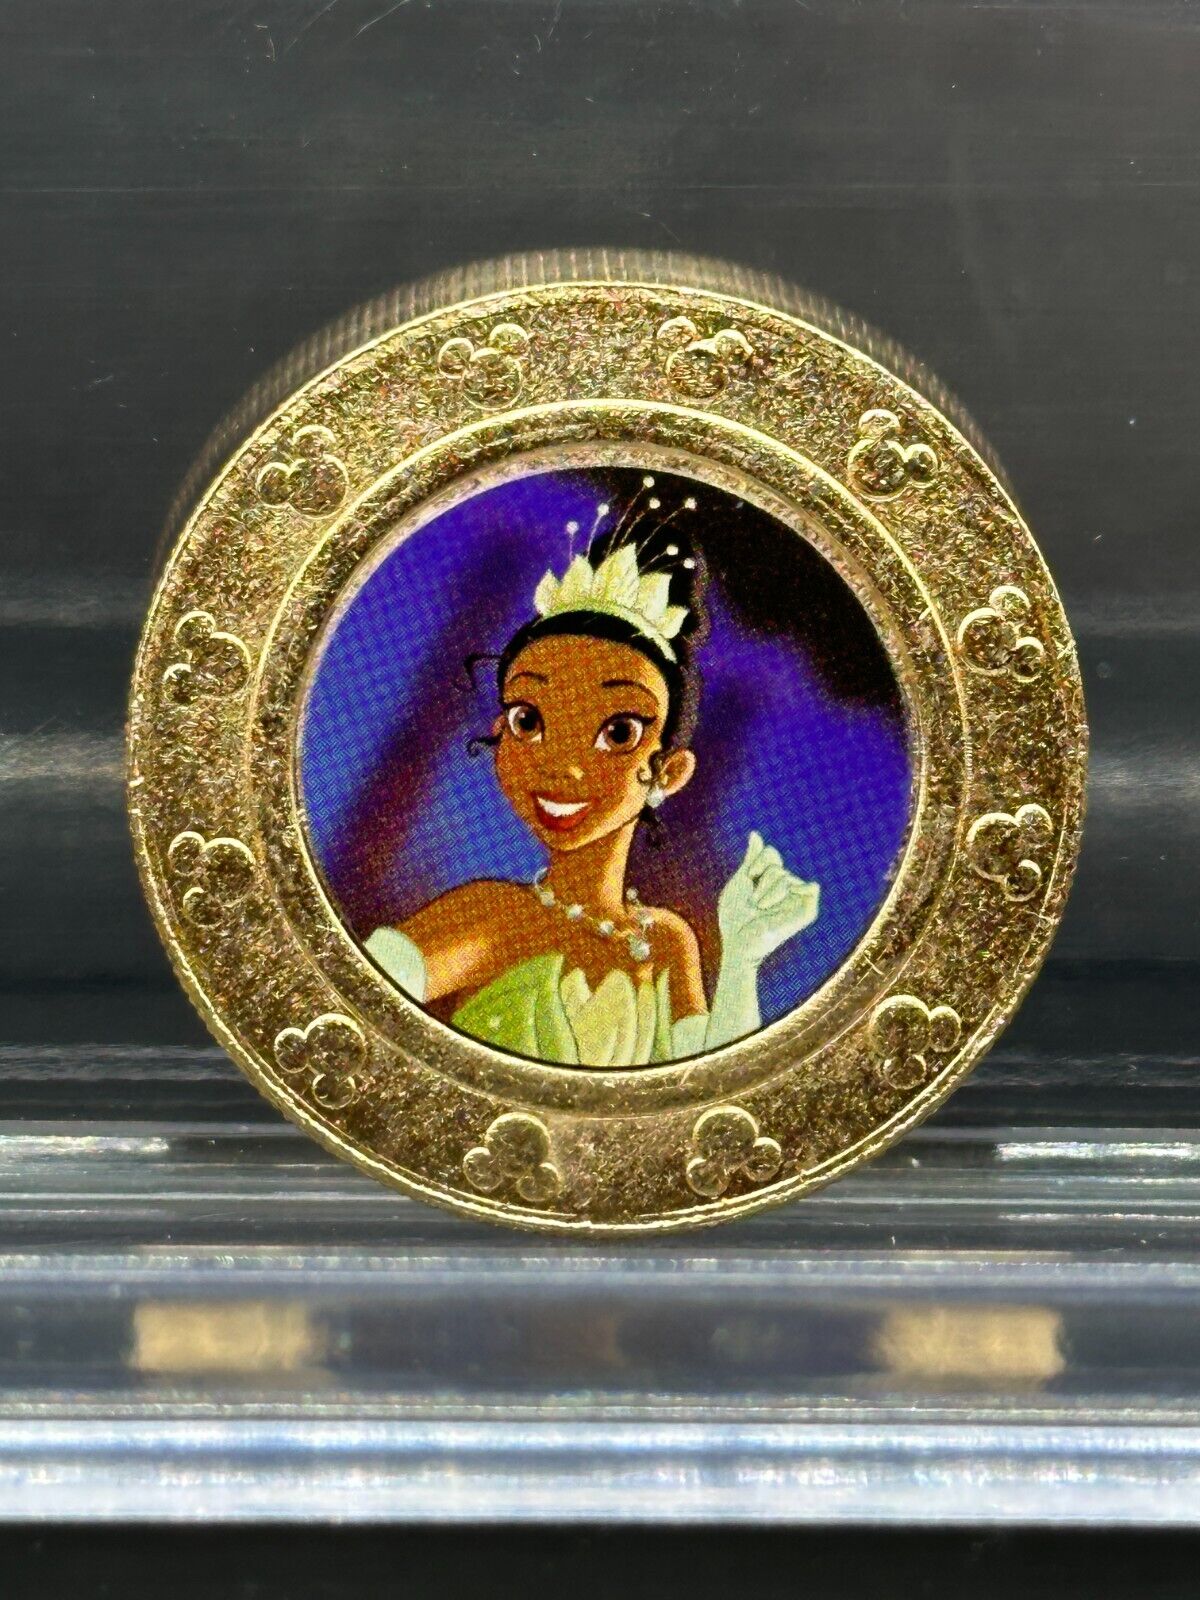 Frankford Wonder Ball Disney 100 Collectible Coins - YOU PICK